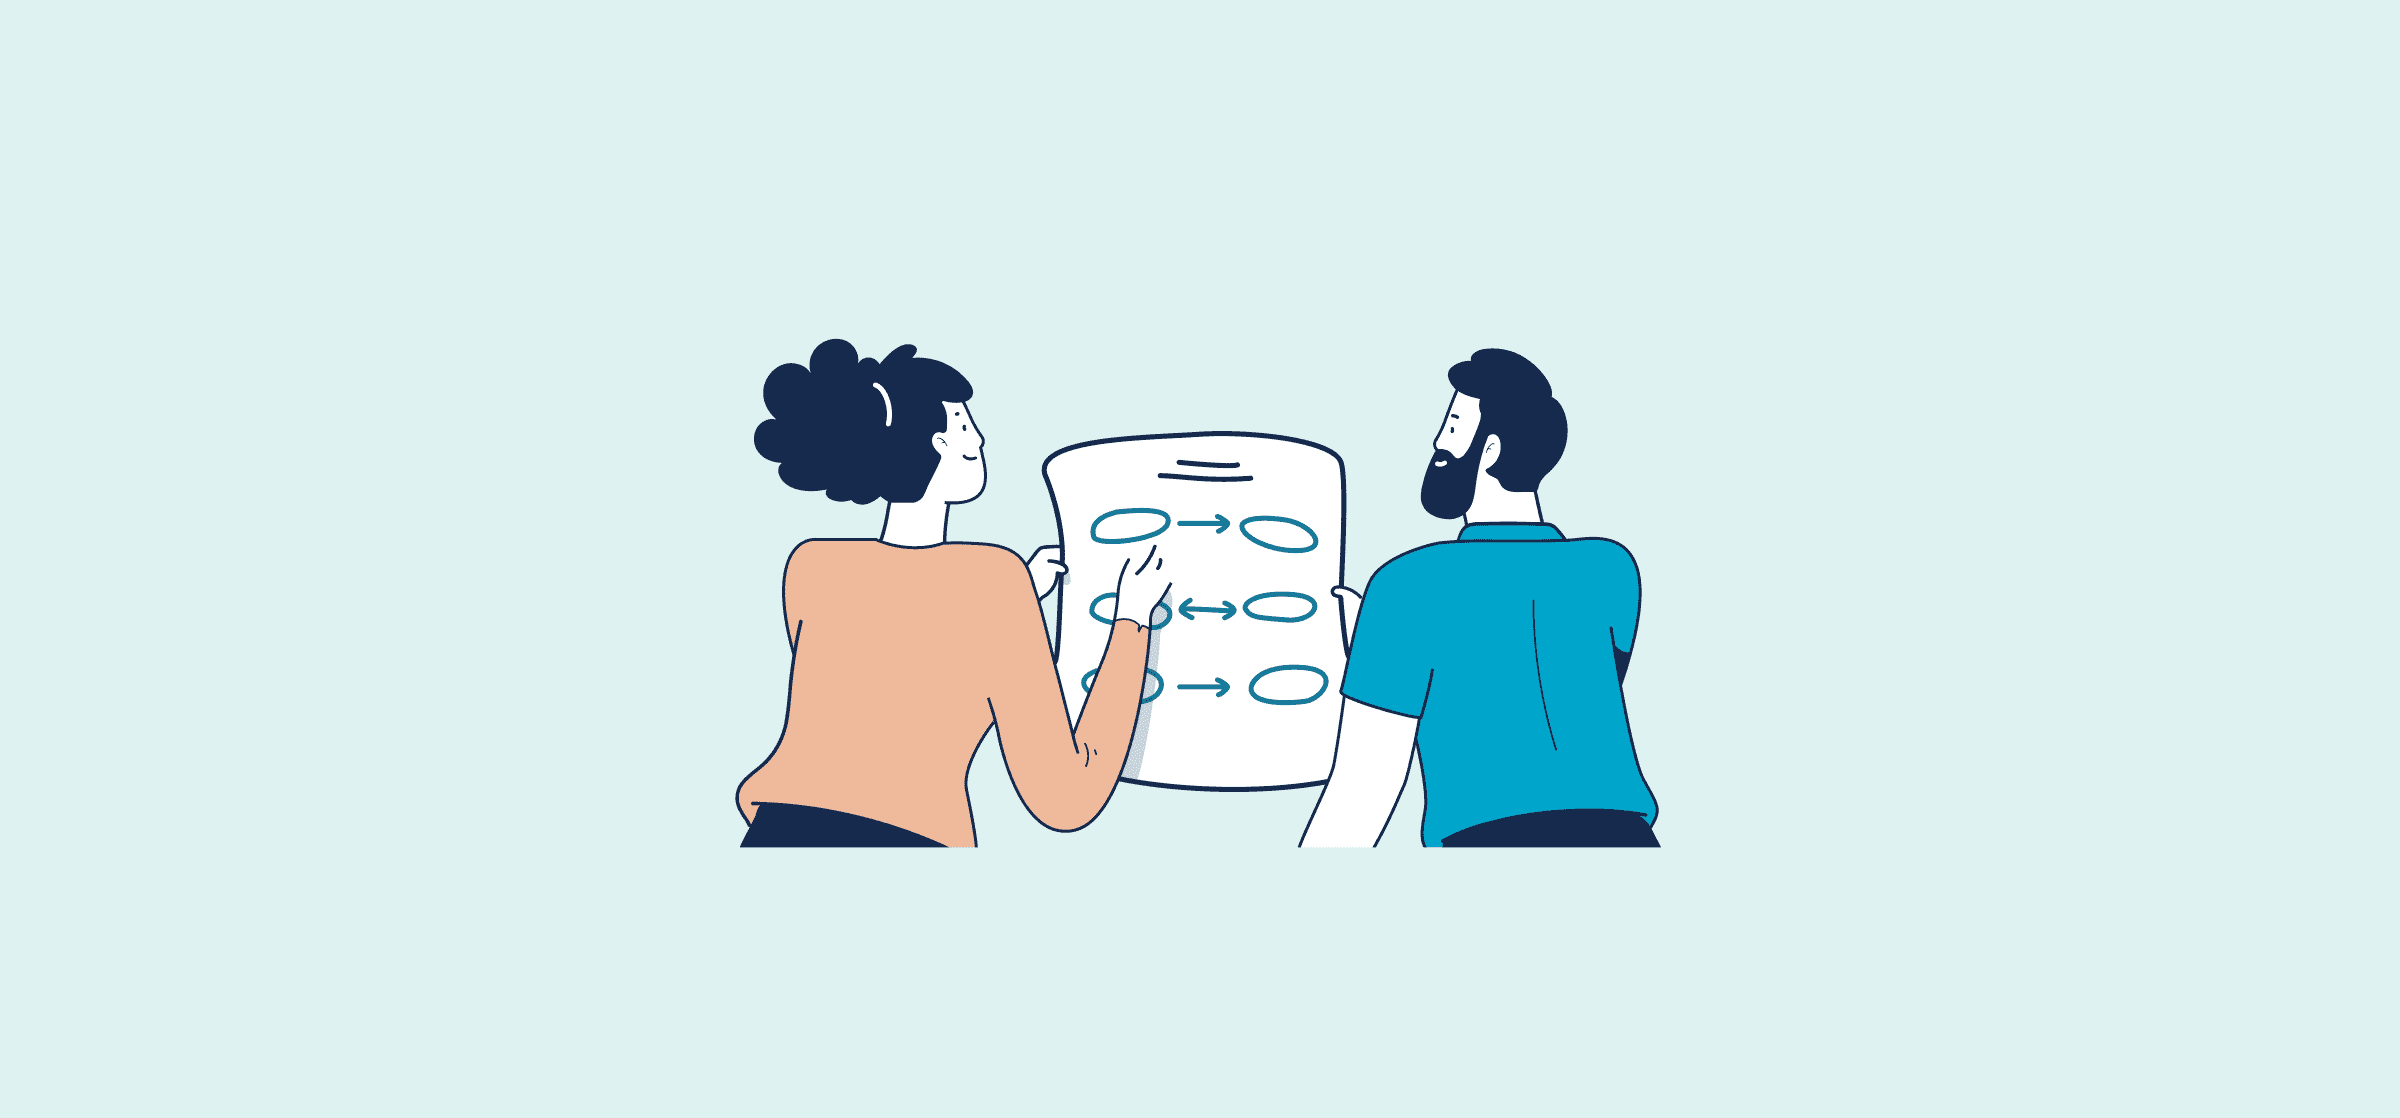 An illustration of two people holding up a diagram, representing product roadmap software.